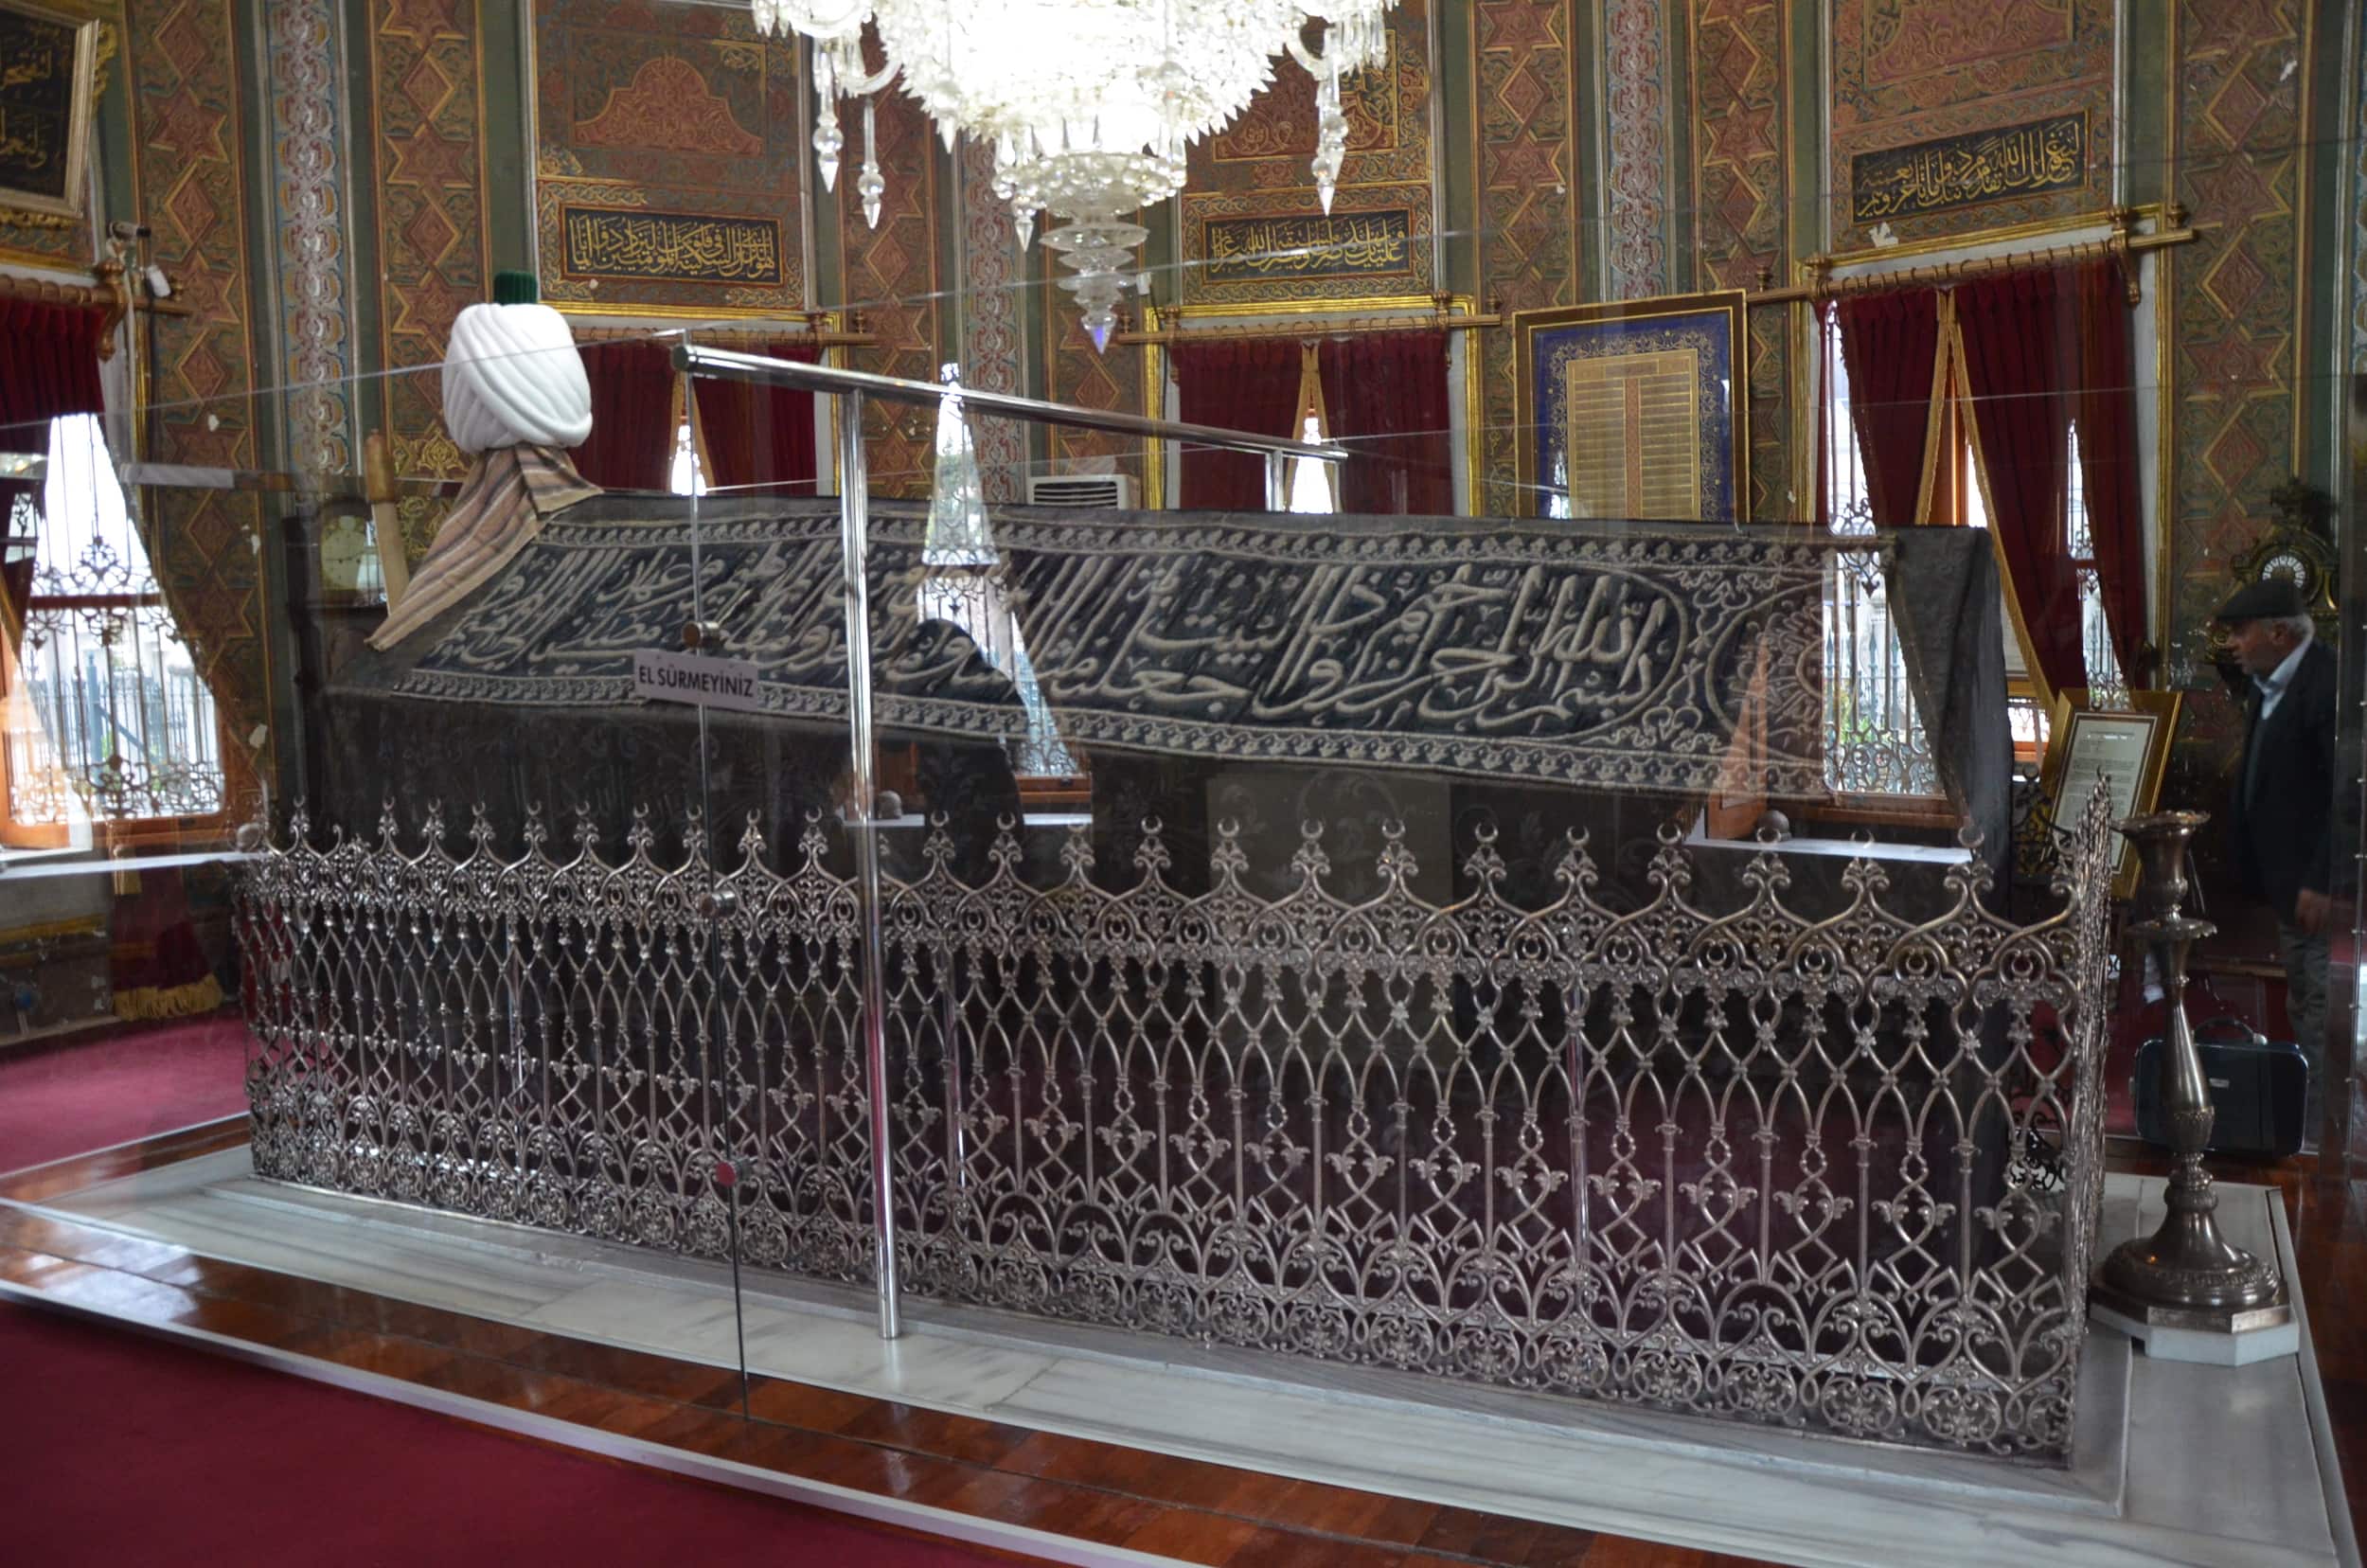 Tomb of Mehmed II at the Fatih Mosque in Istanbul, Turkey